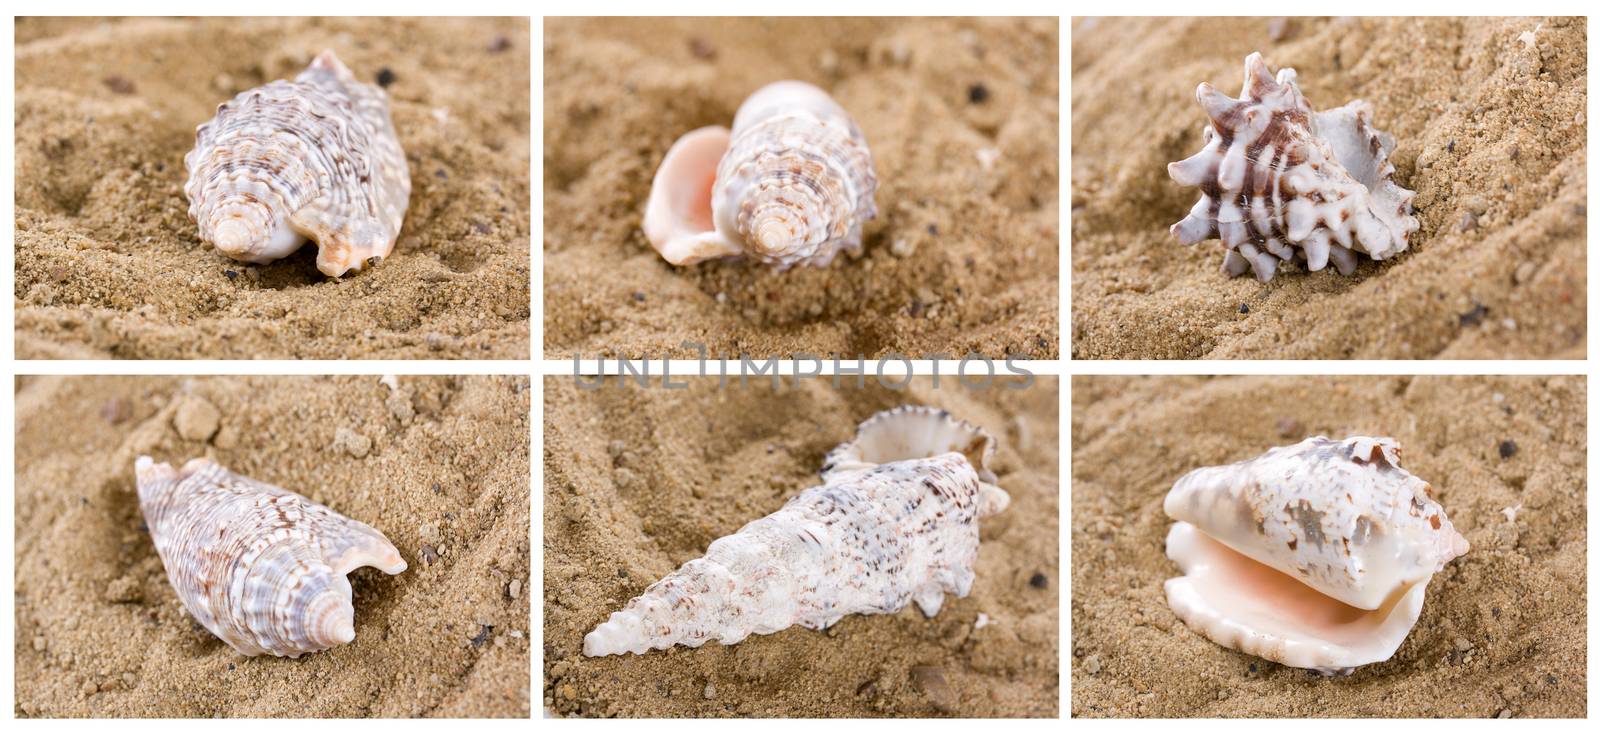 shell on the sand by Irina1977